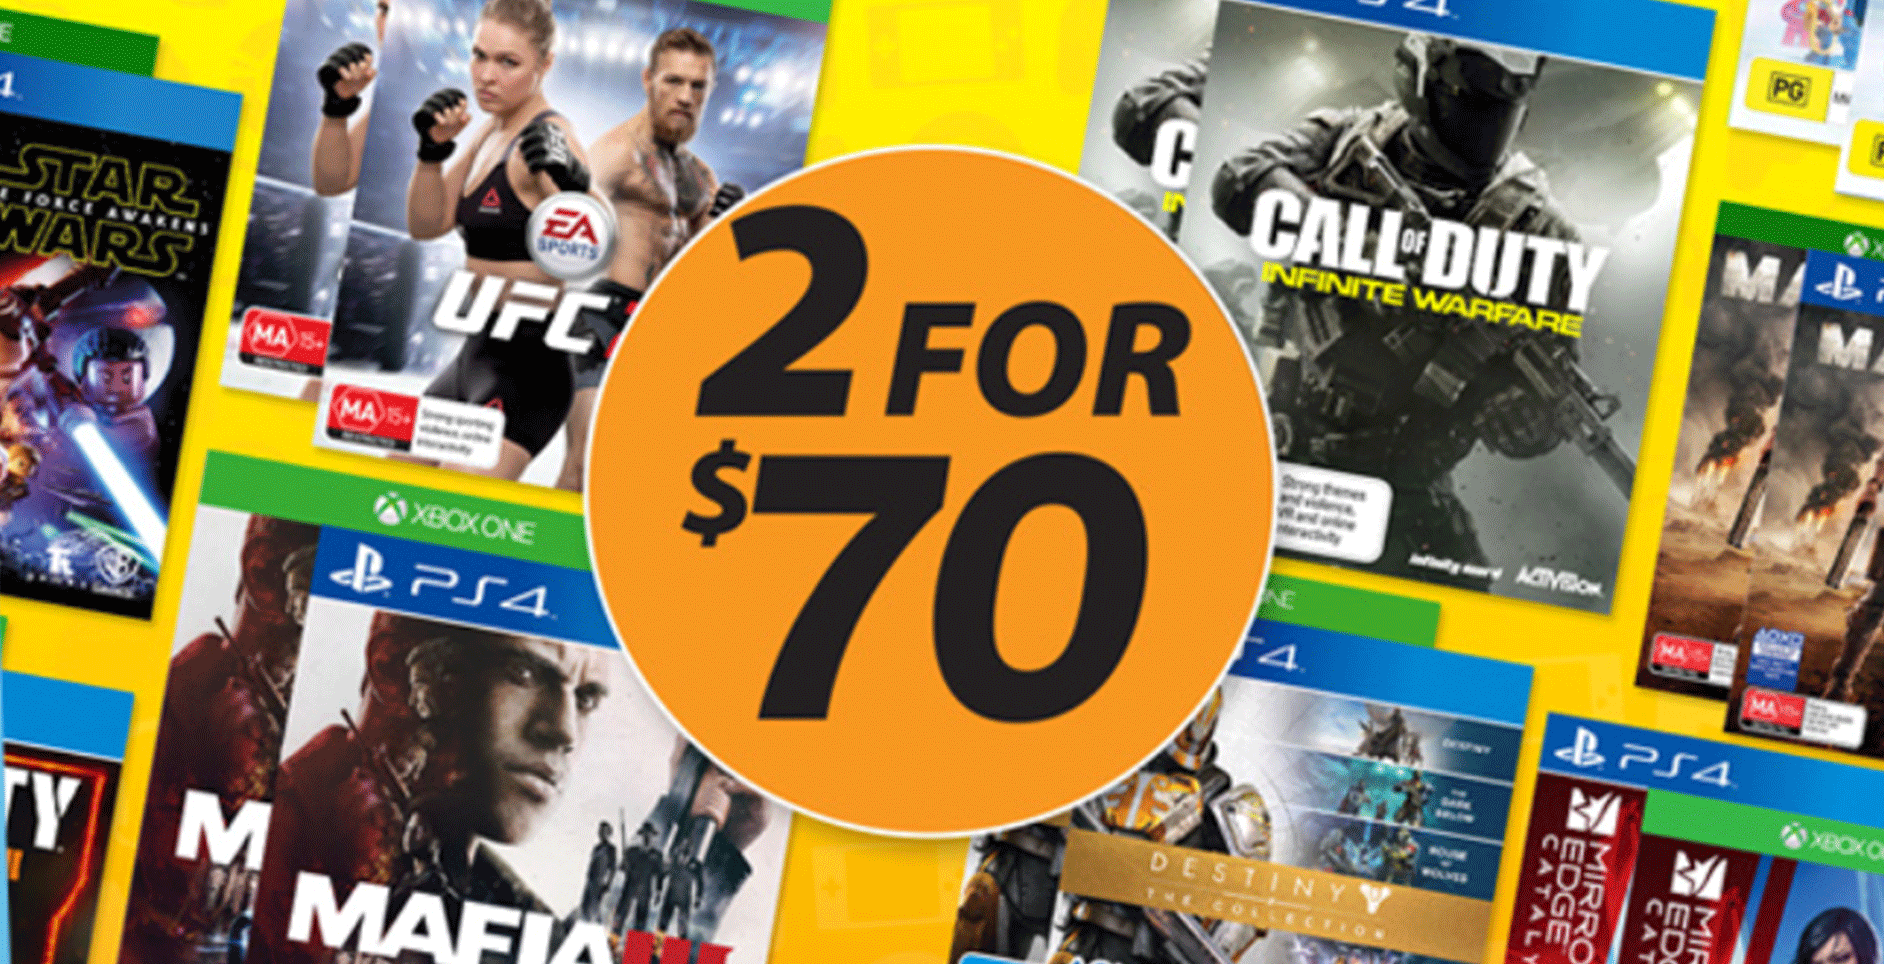 JB Hi-Fi Has A 2 For $70 Gaming Sale Too